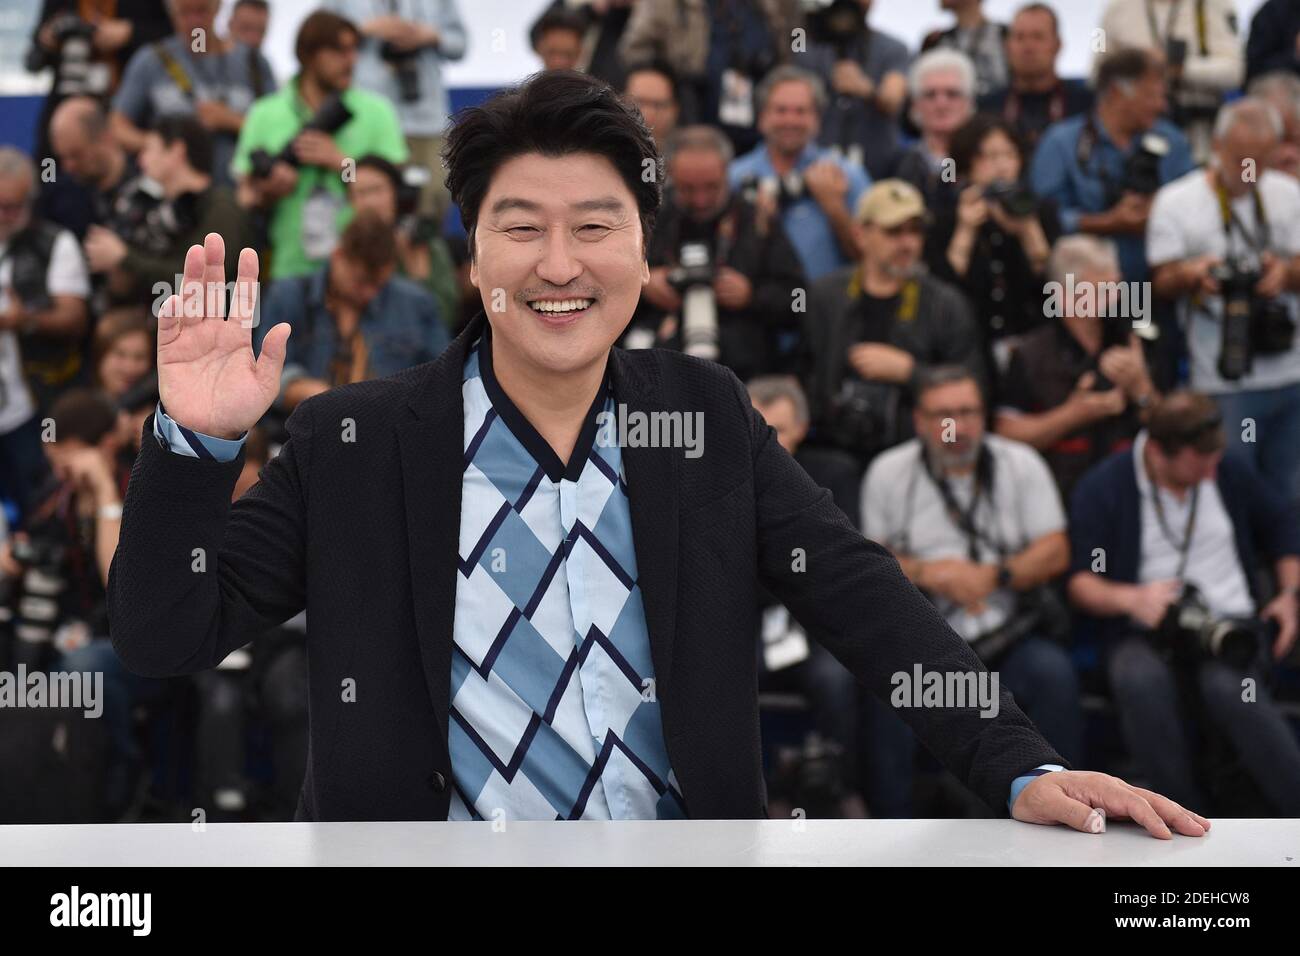 Song Kang-ho attends the photocall for 'Parasite' during the 72nd annual Cannes Film Festival on May 22, 2019 in Cannes, France Stock Photo